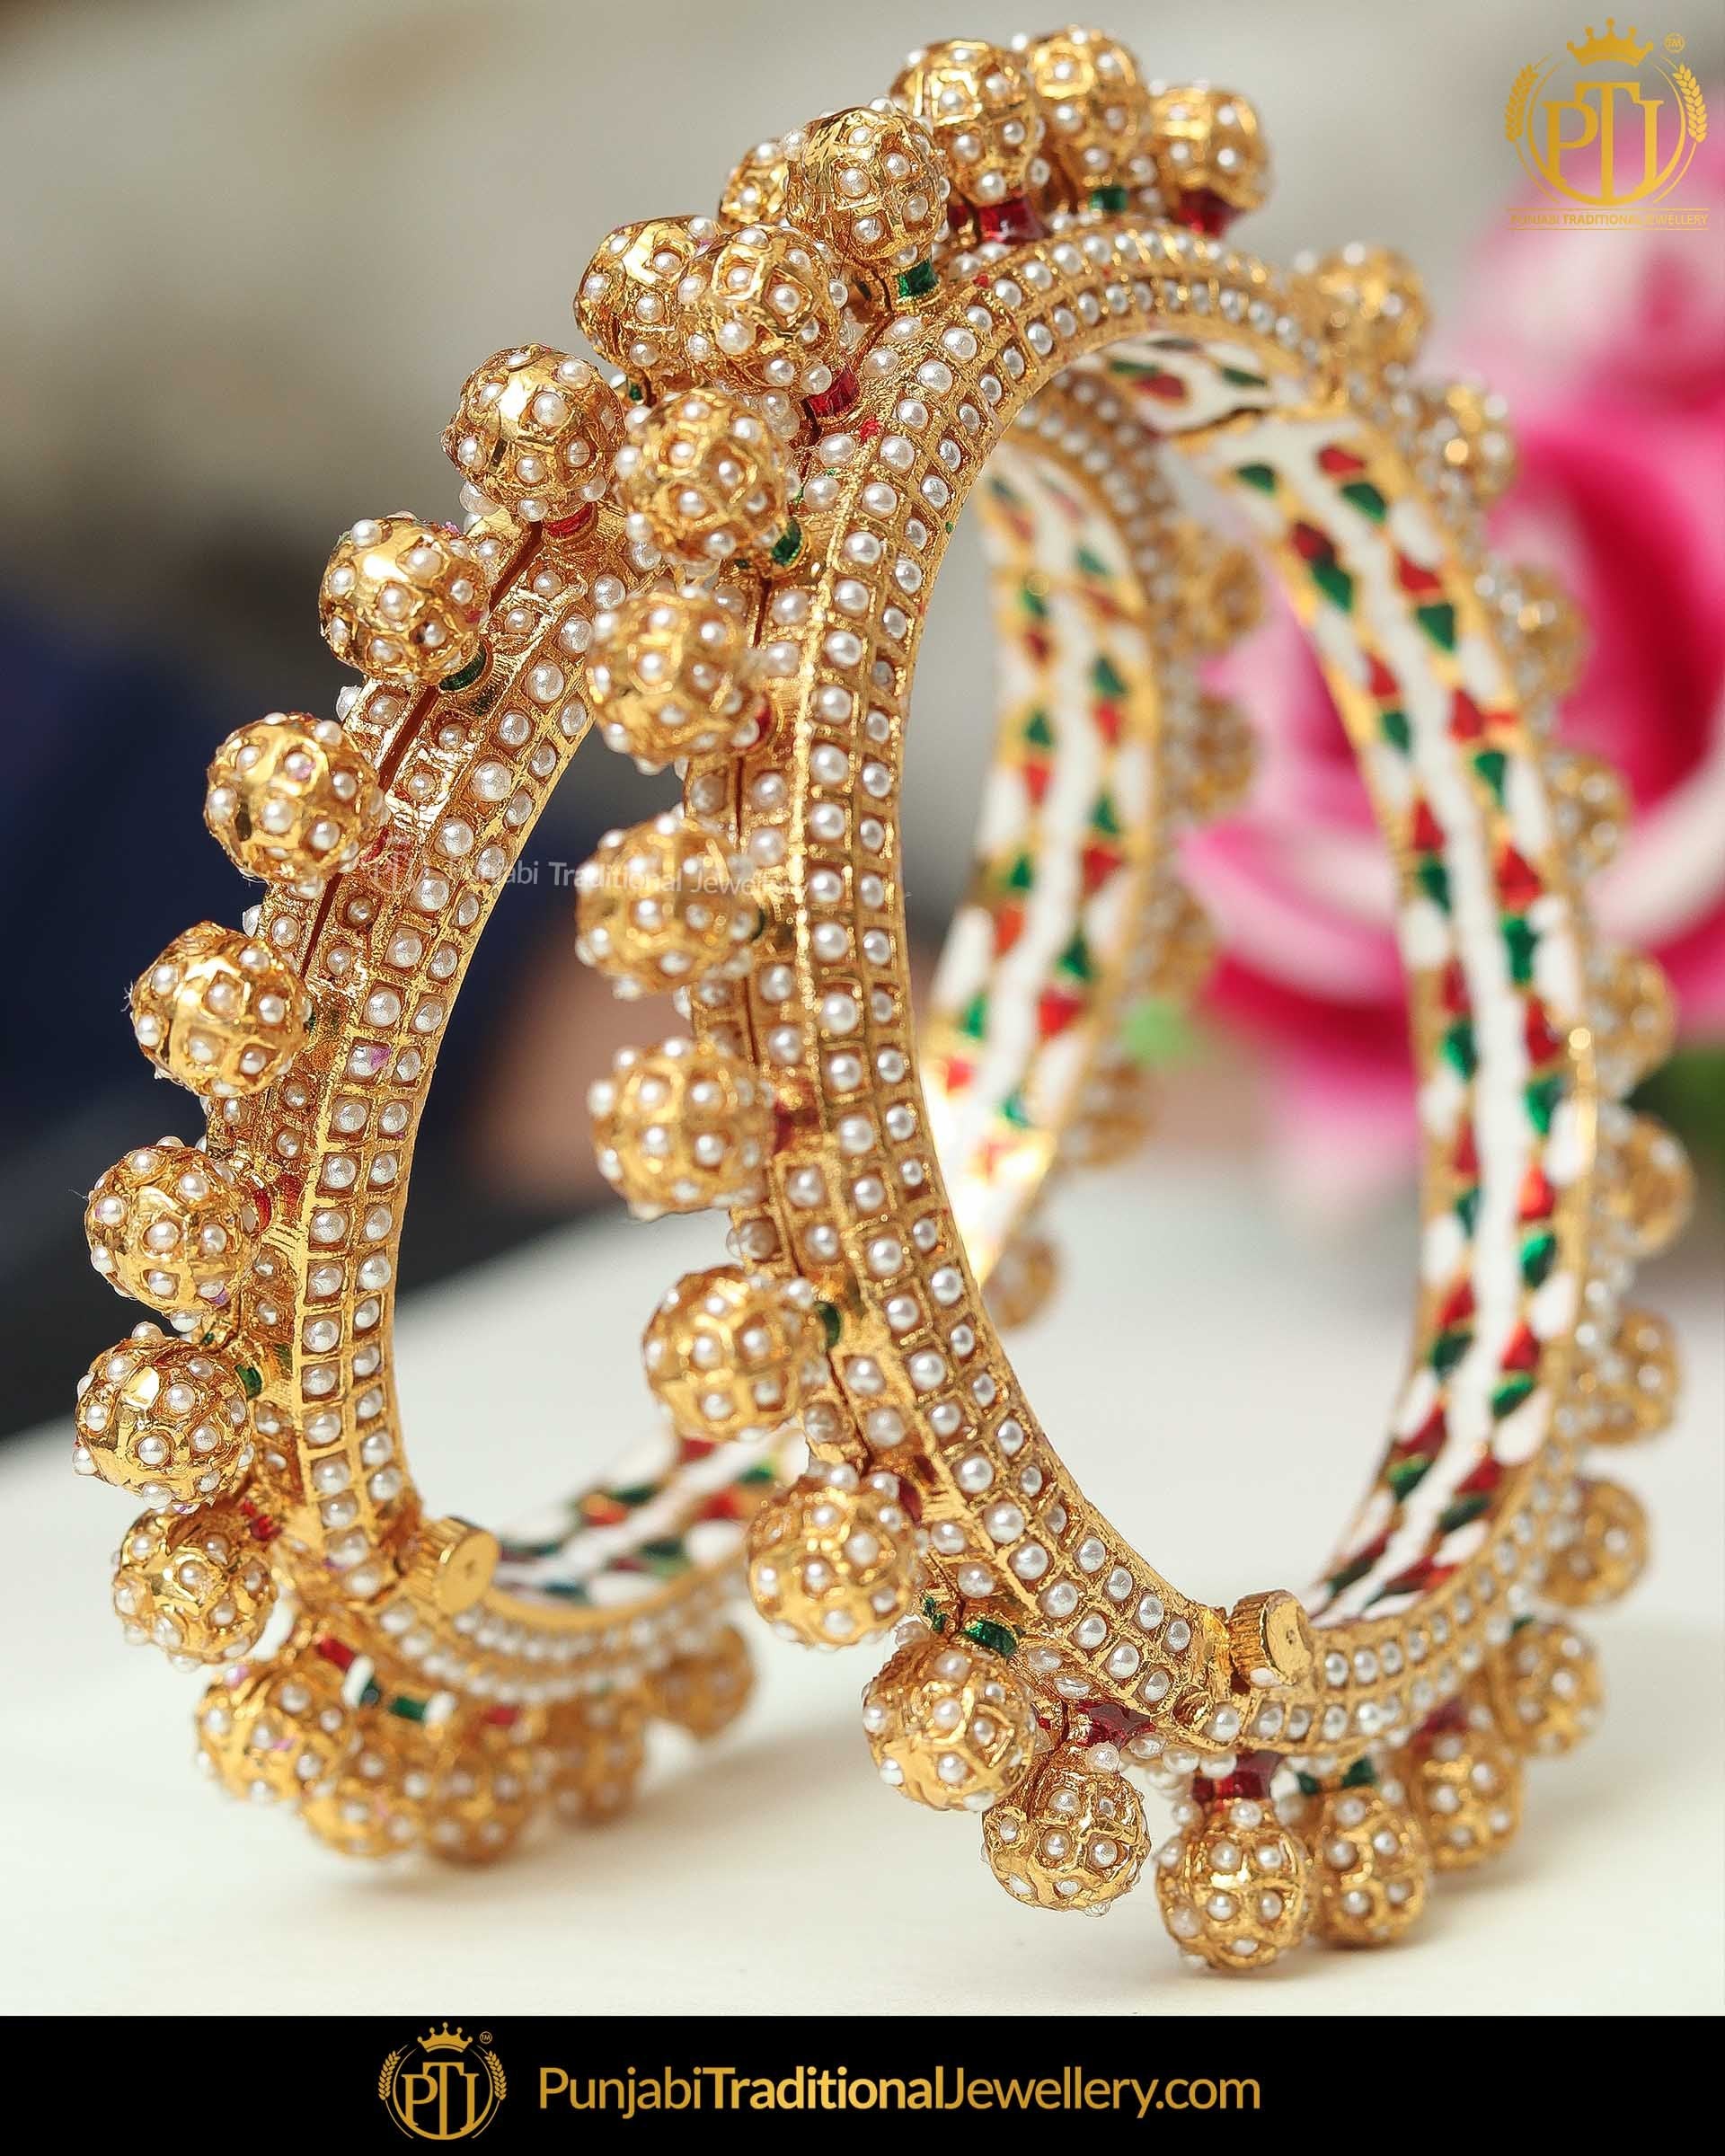 Gold Finished Pearl Karra Bangles (Pair)| Punjabi Traditional Jewellery Exclusive